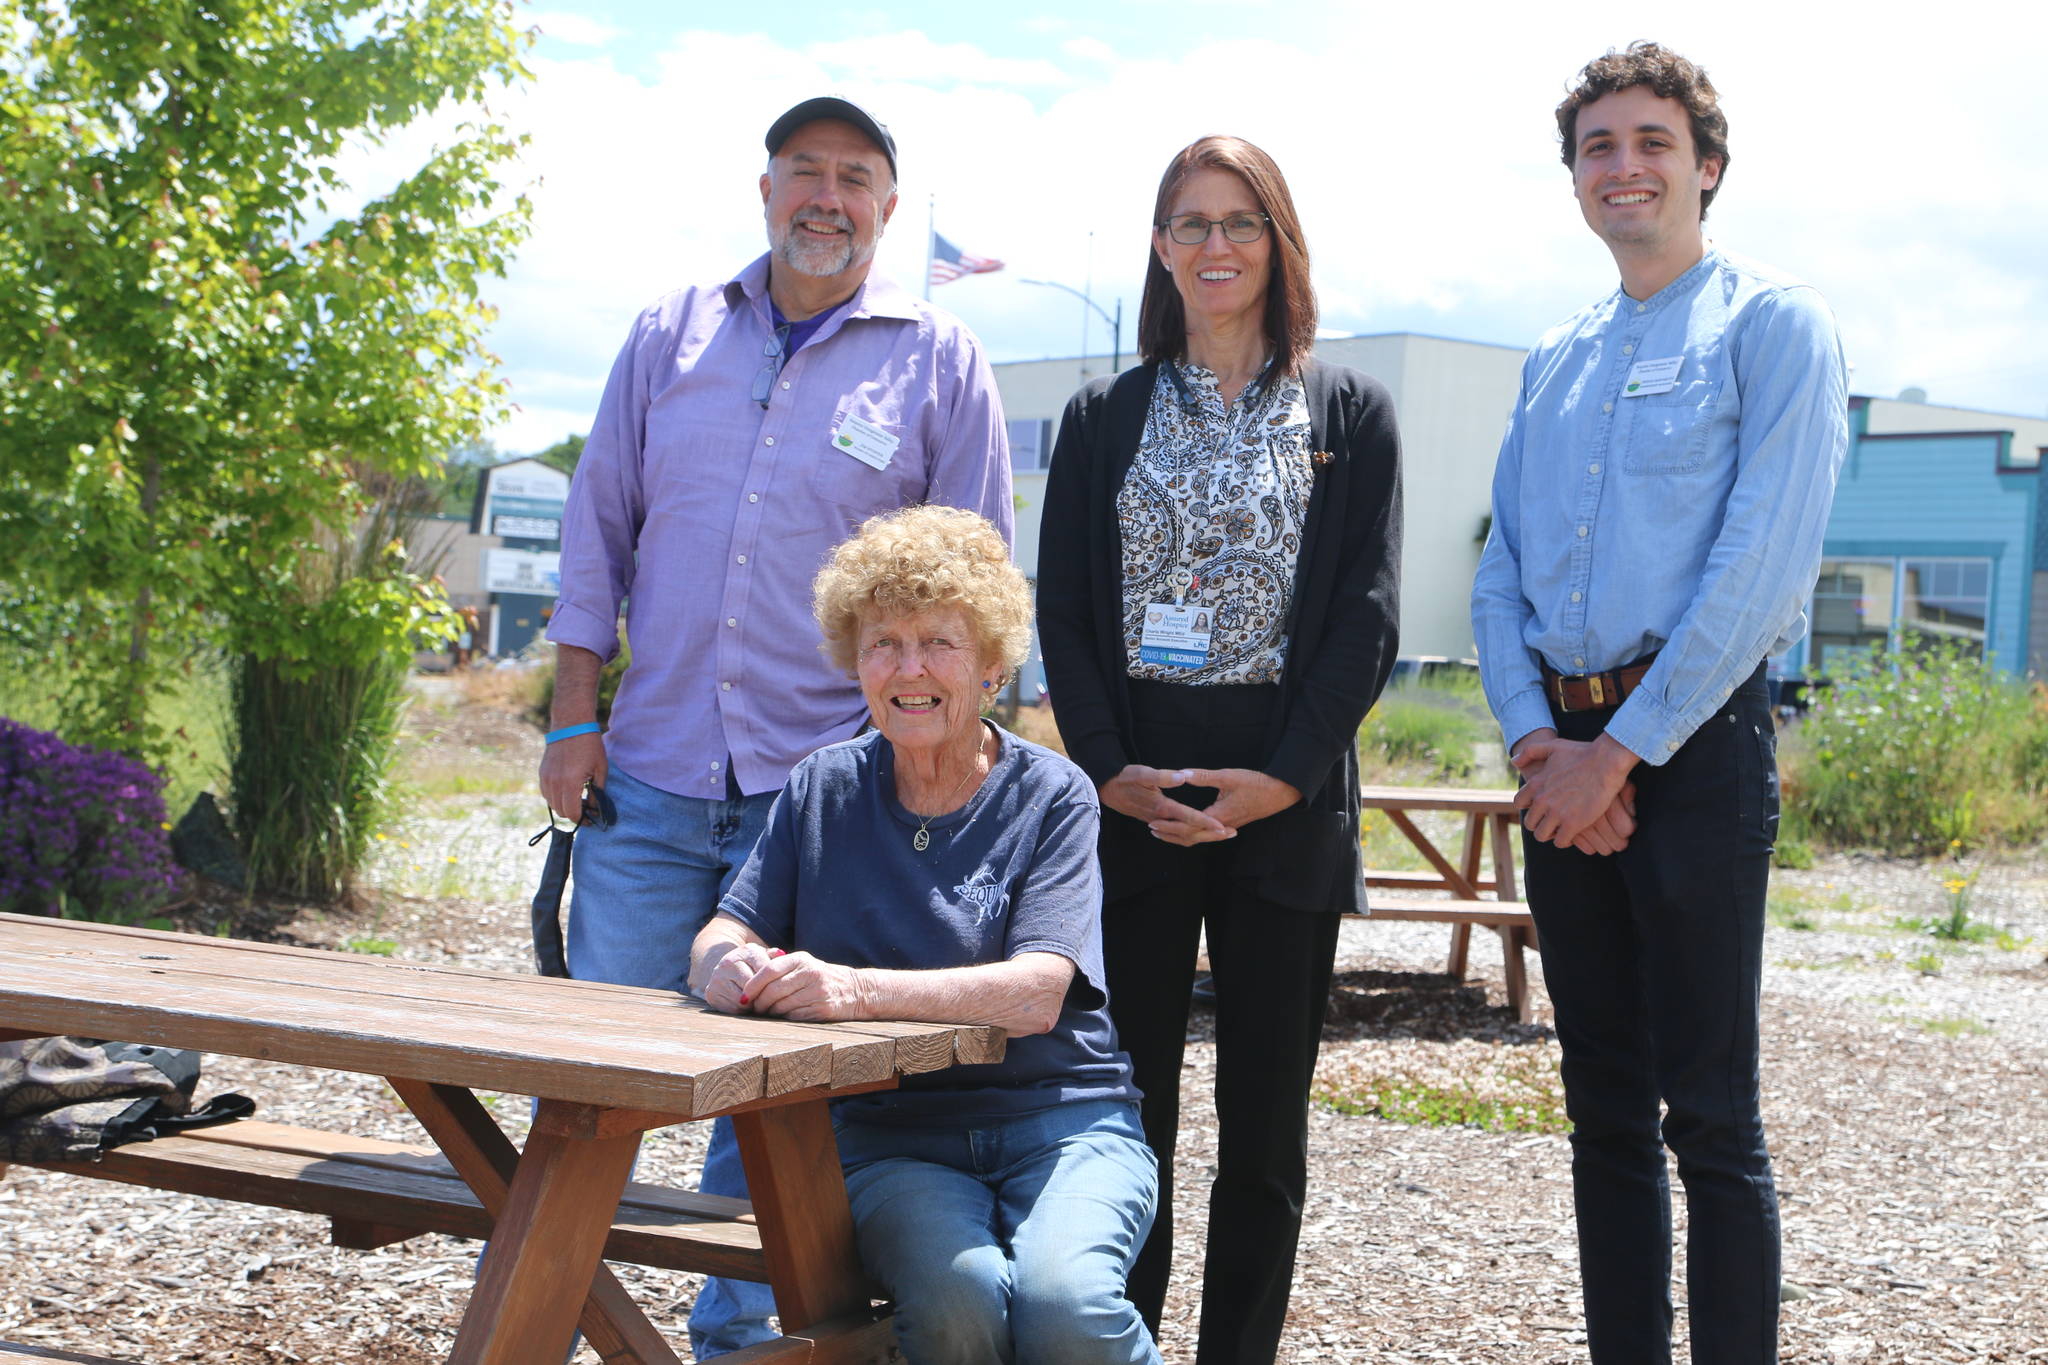 On June 26-27, Sequim-Dungeness Valley Chamber of Commerce leaders and volunteers ask for any help cleaning Whimsy Park. Organizers include from left, Jim Stoffer, board 
past-president, volunteer Emily Westcott, Charla Wright, board president, and 
Tristan Mortarotti, membership manager. Photo by Anthony